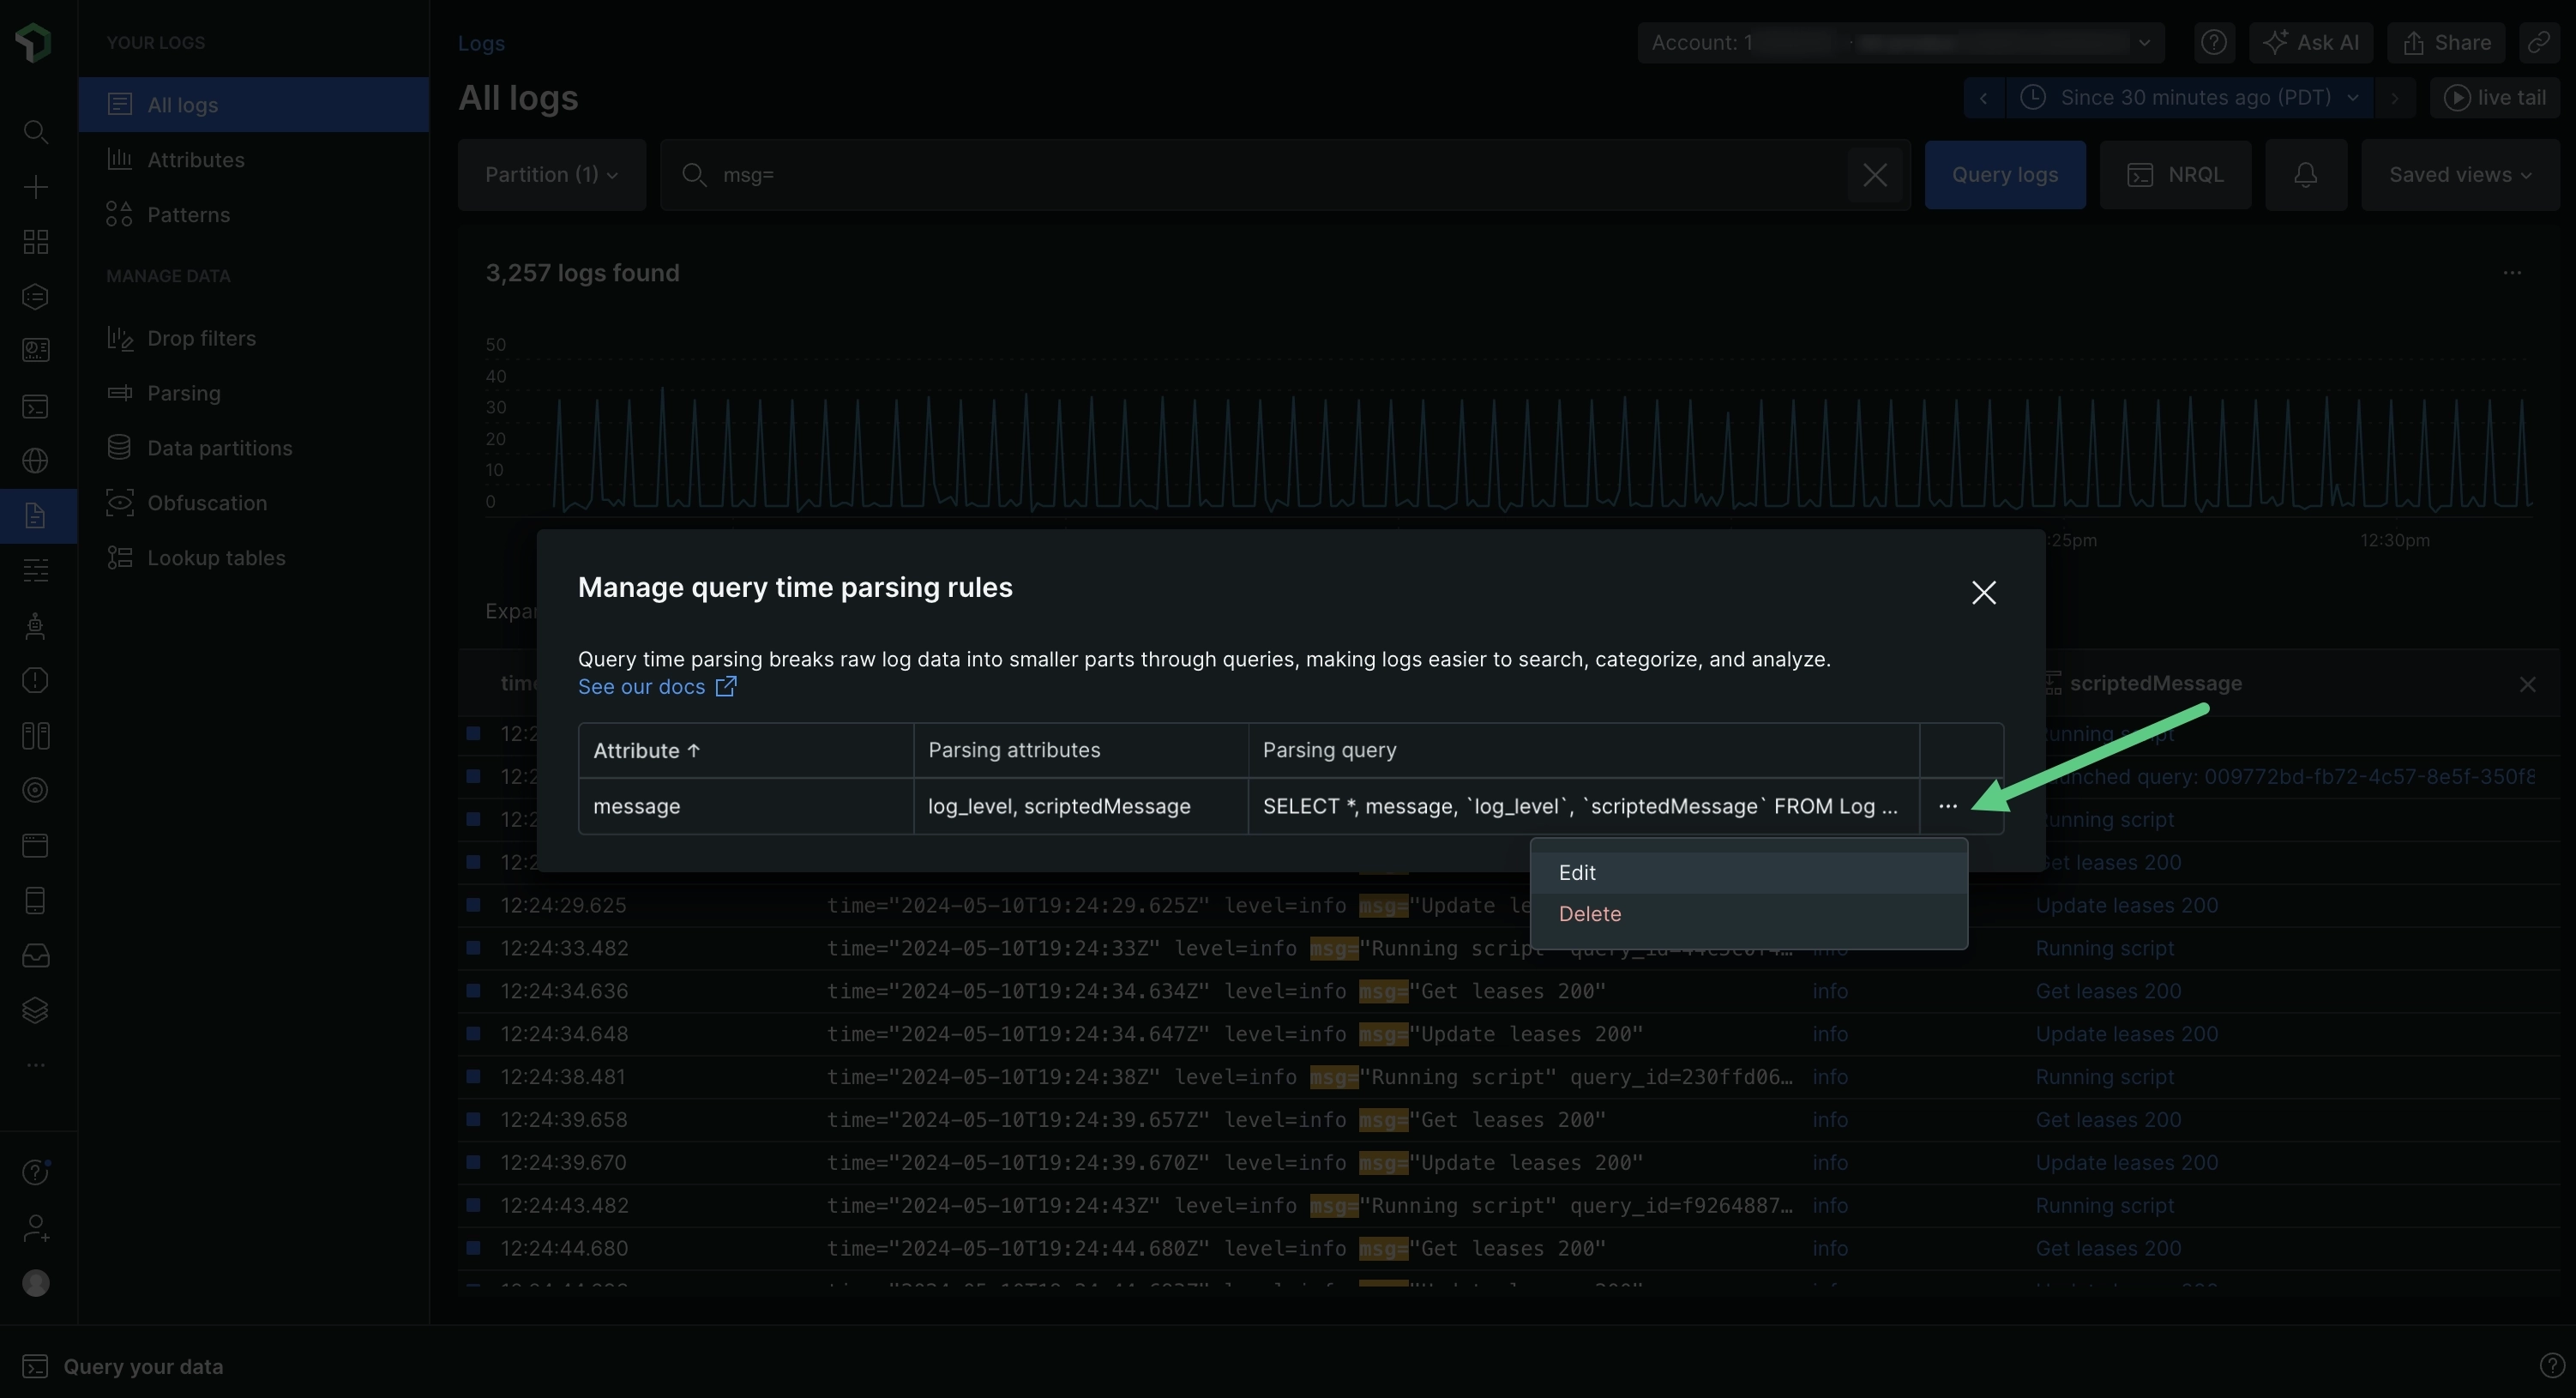 Screenshot showing the rules manager